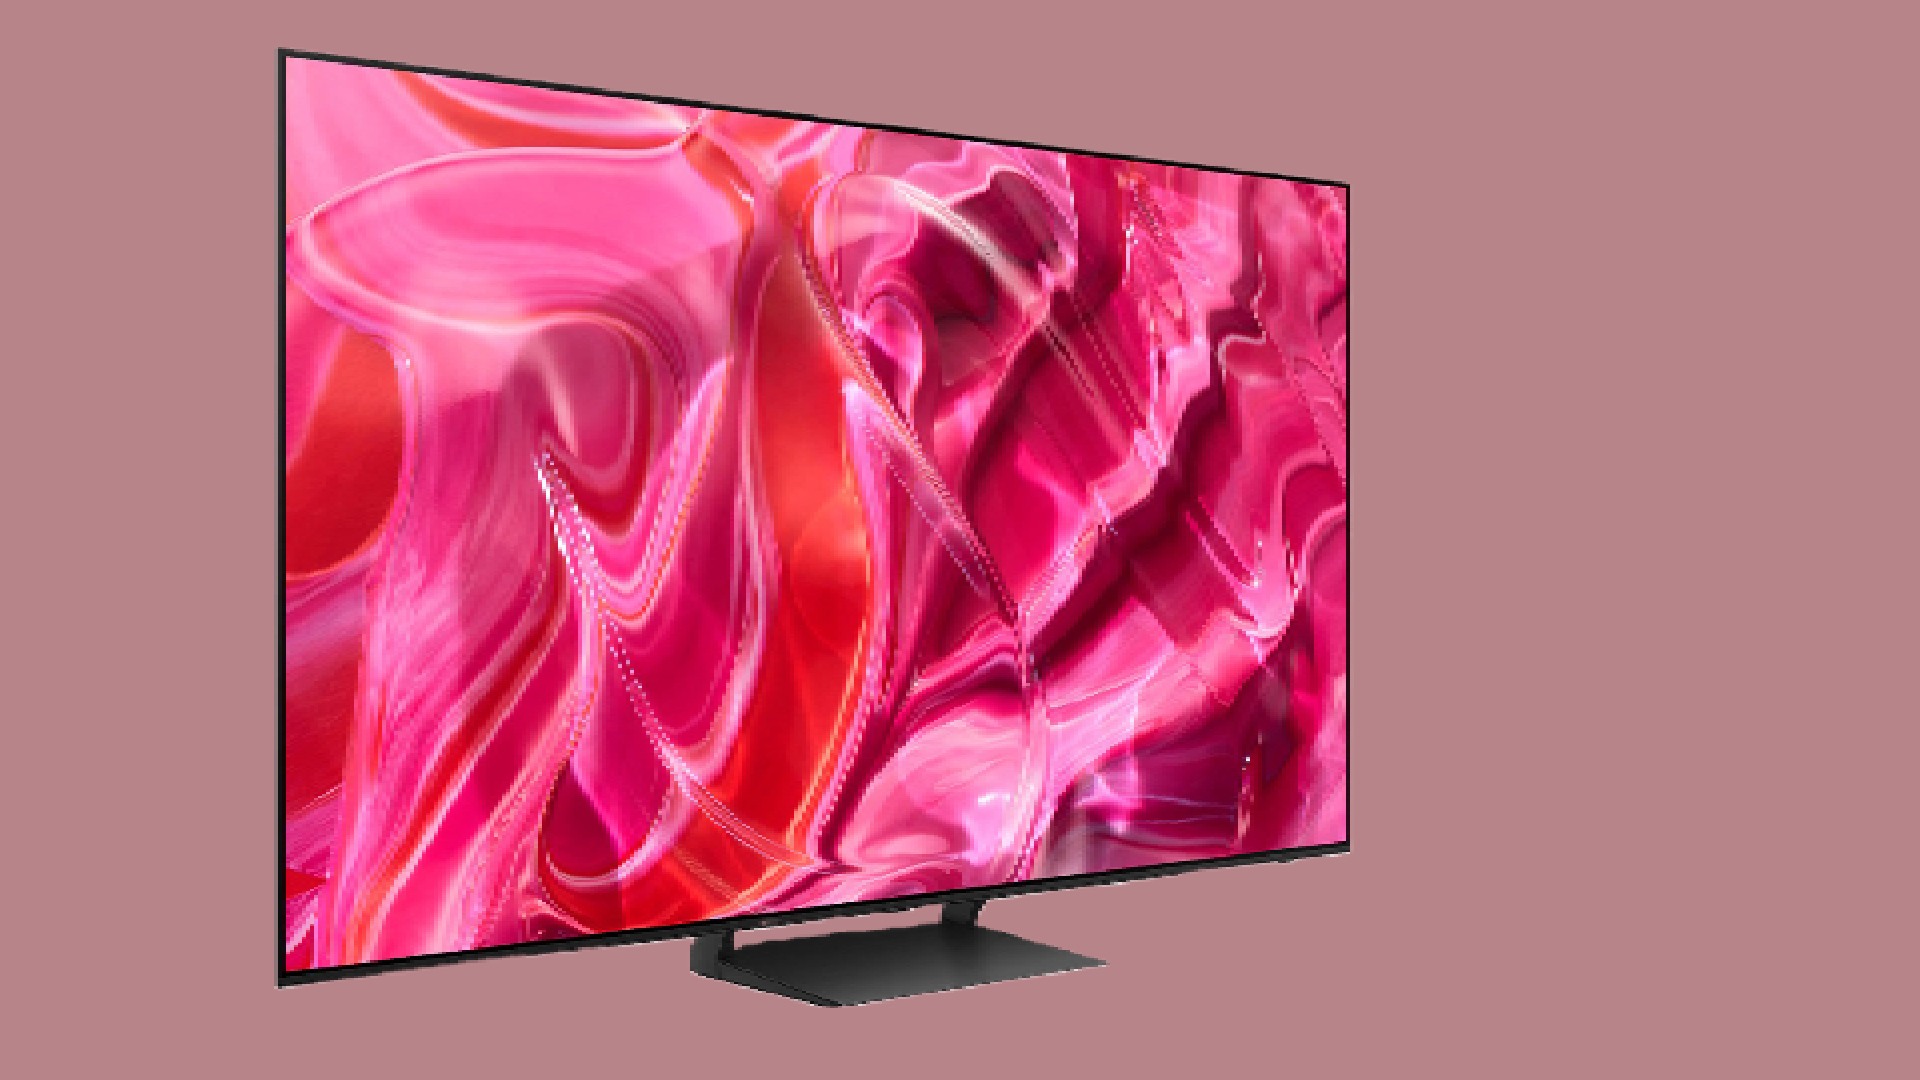 Philips OLED808 TV UK prices and availability confirmed